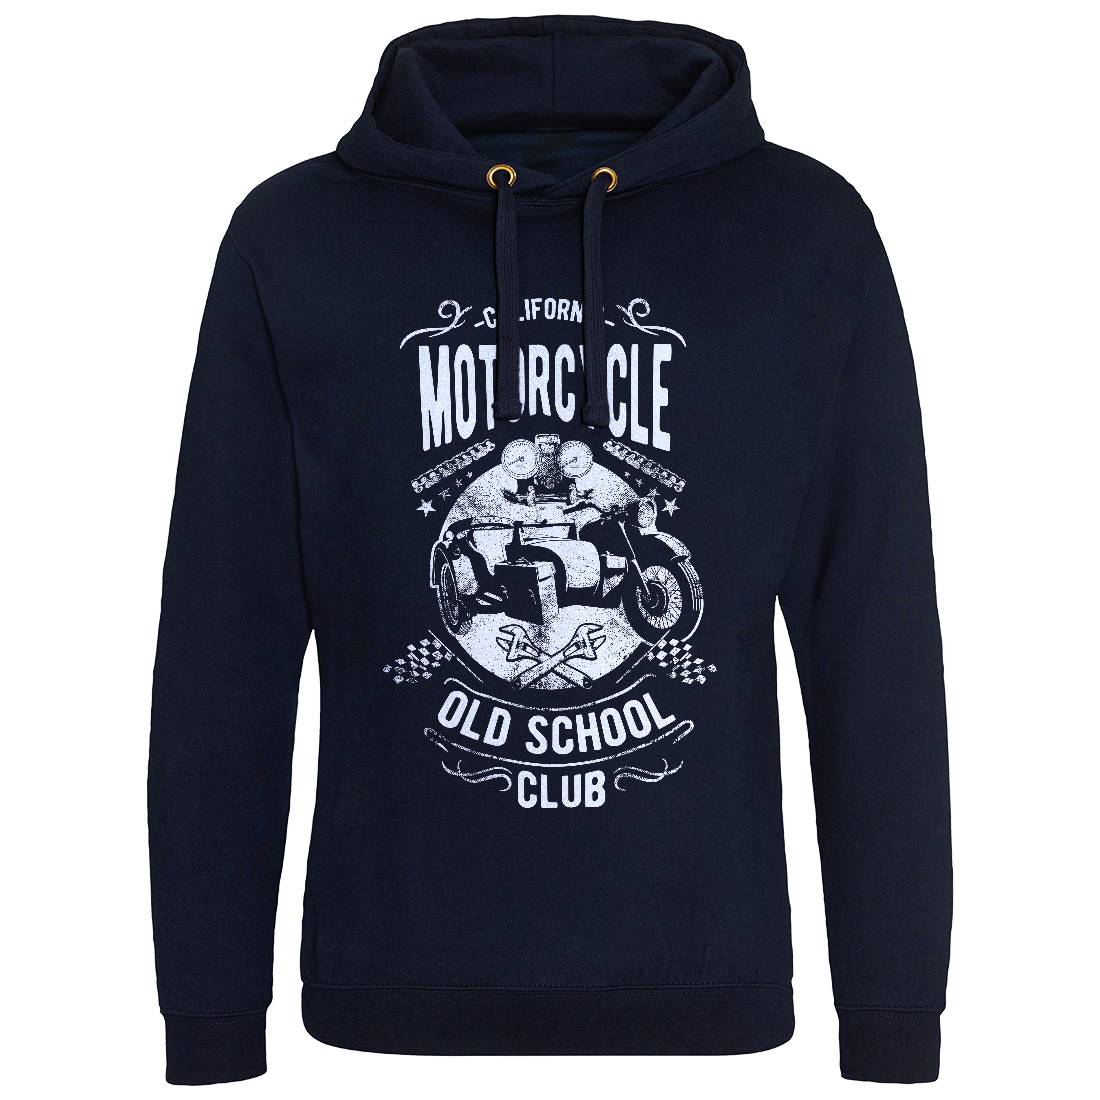 California Old School Club Mens Hoodie Without Pocket Motorcycles C913